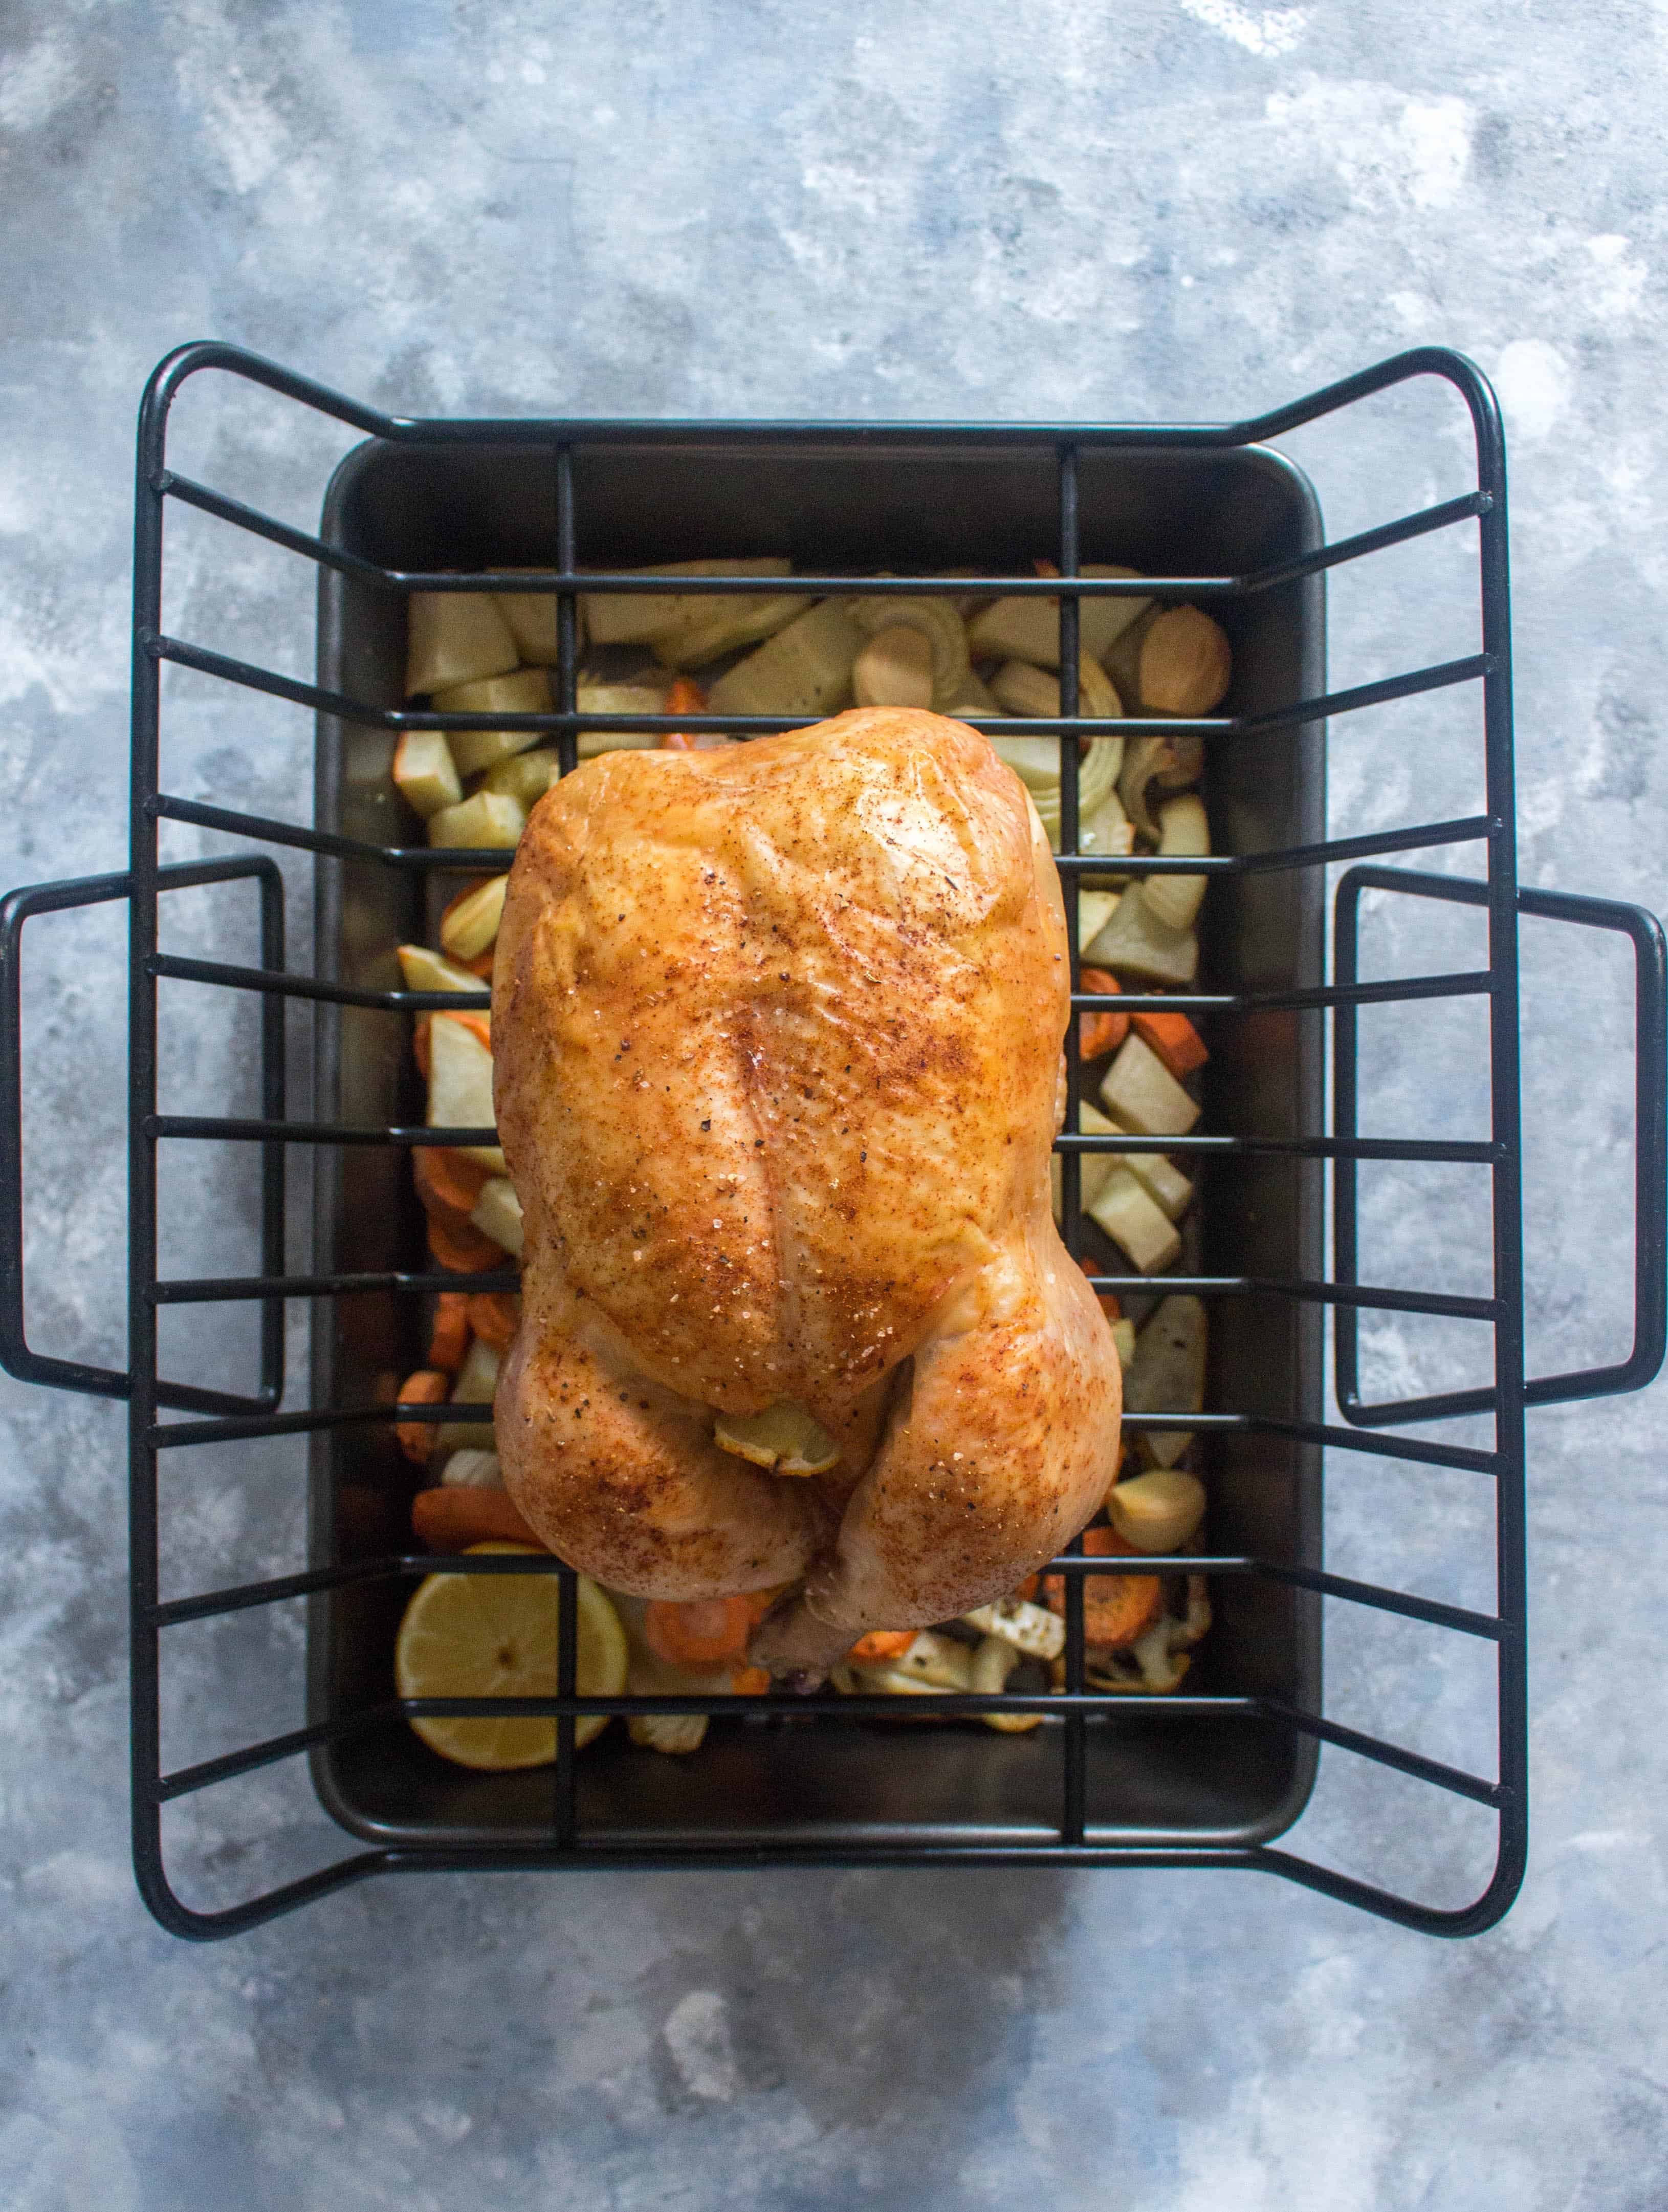 Got a whole chicken? Today I have for you a whole chicken meal prep that makes 3 freezer friendly meals!